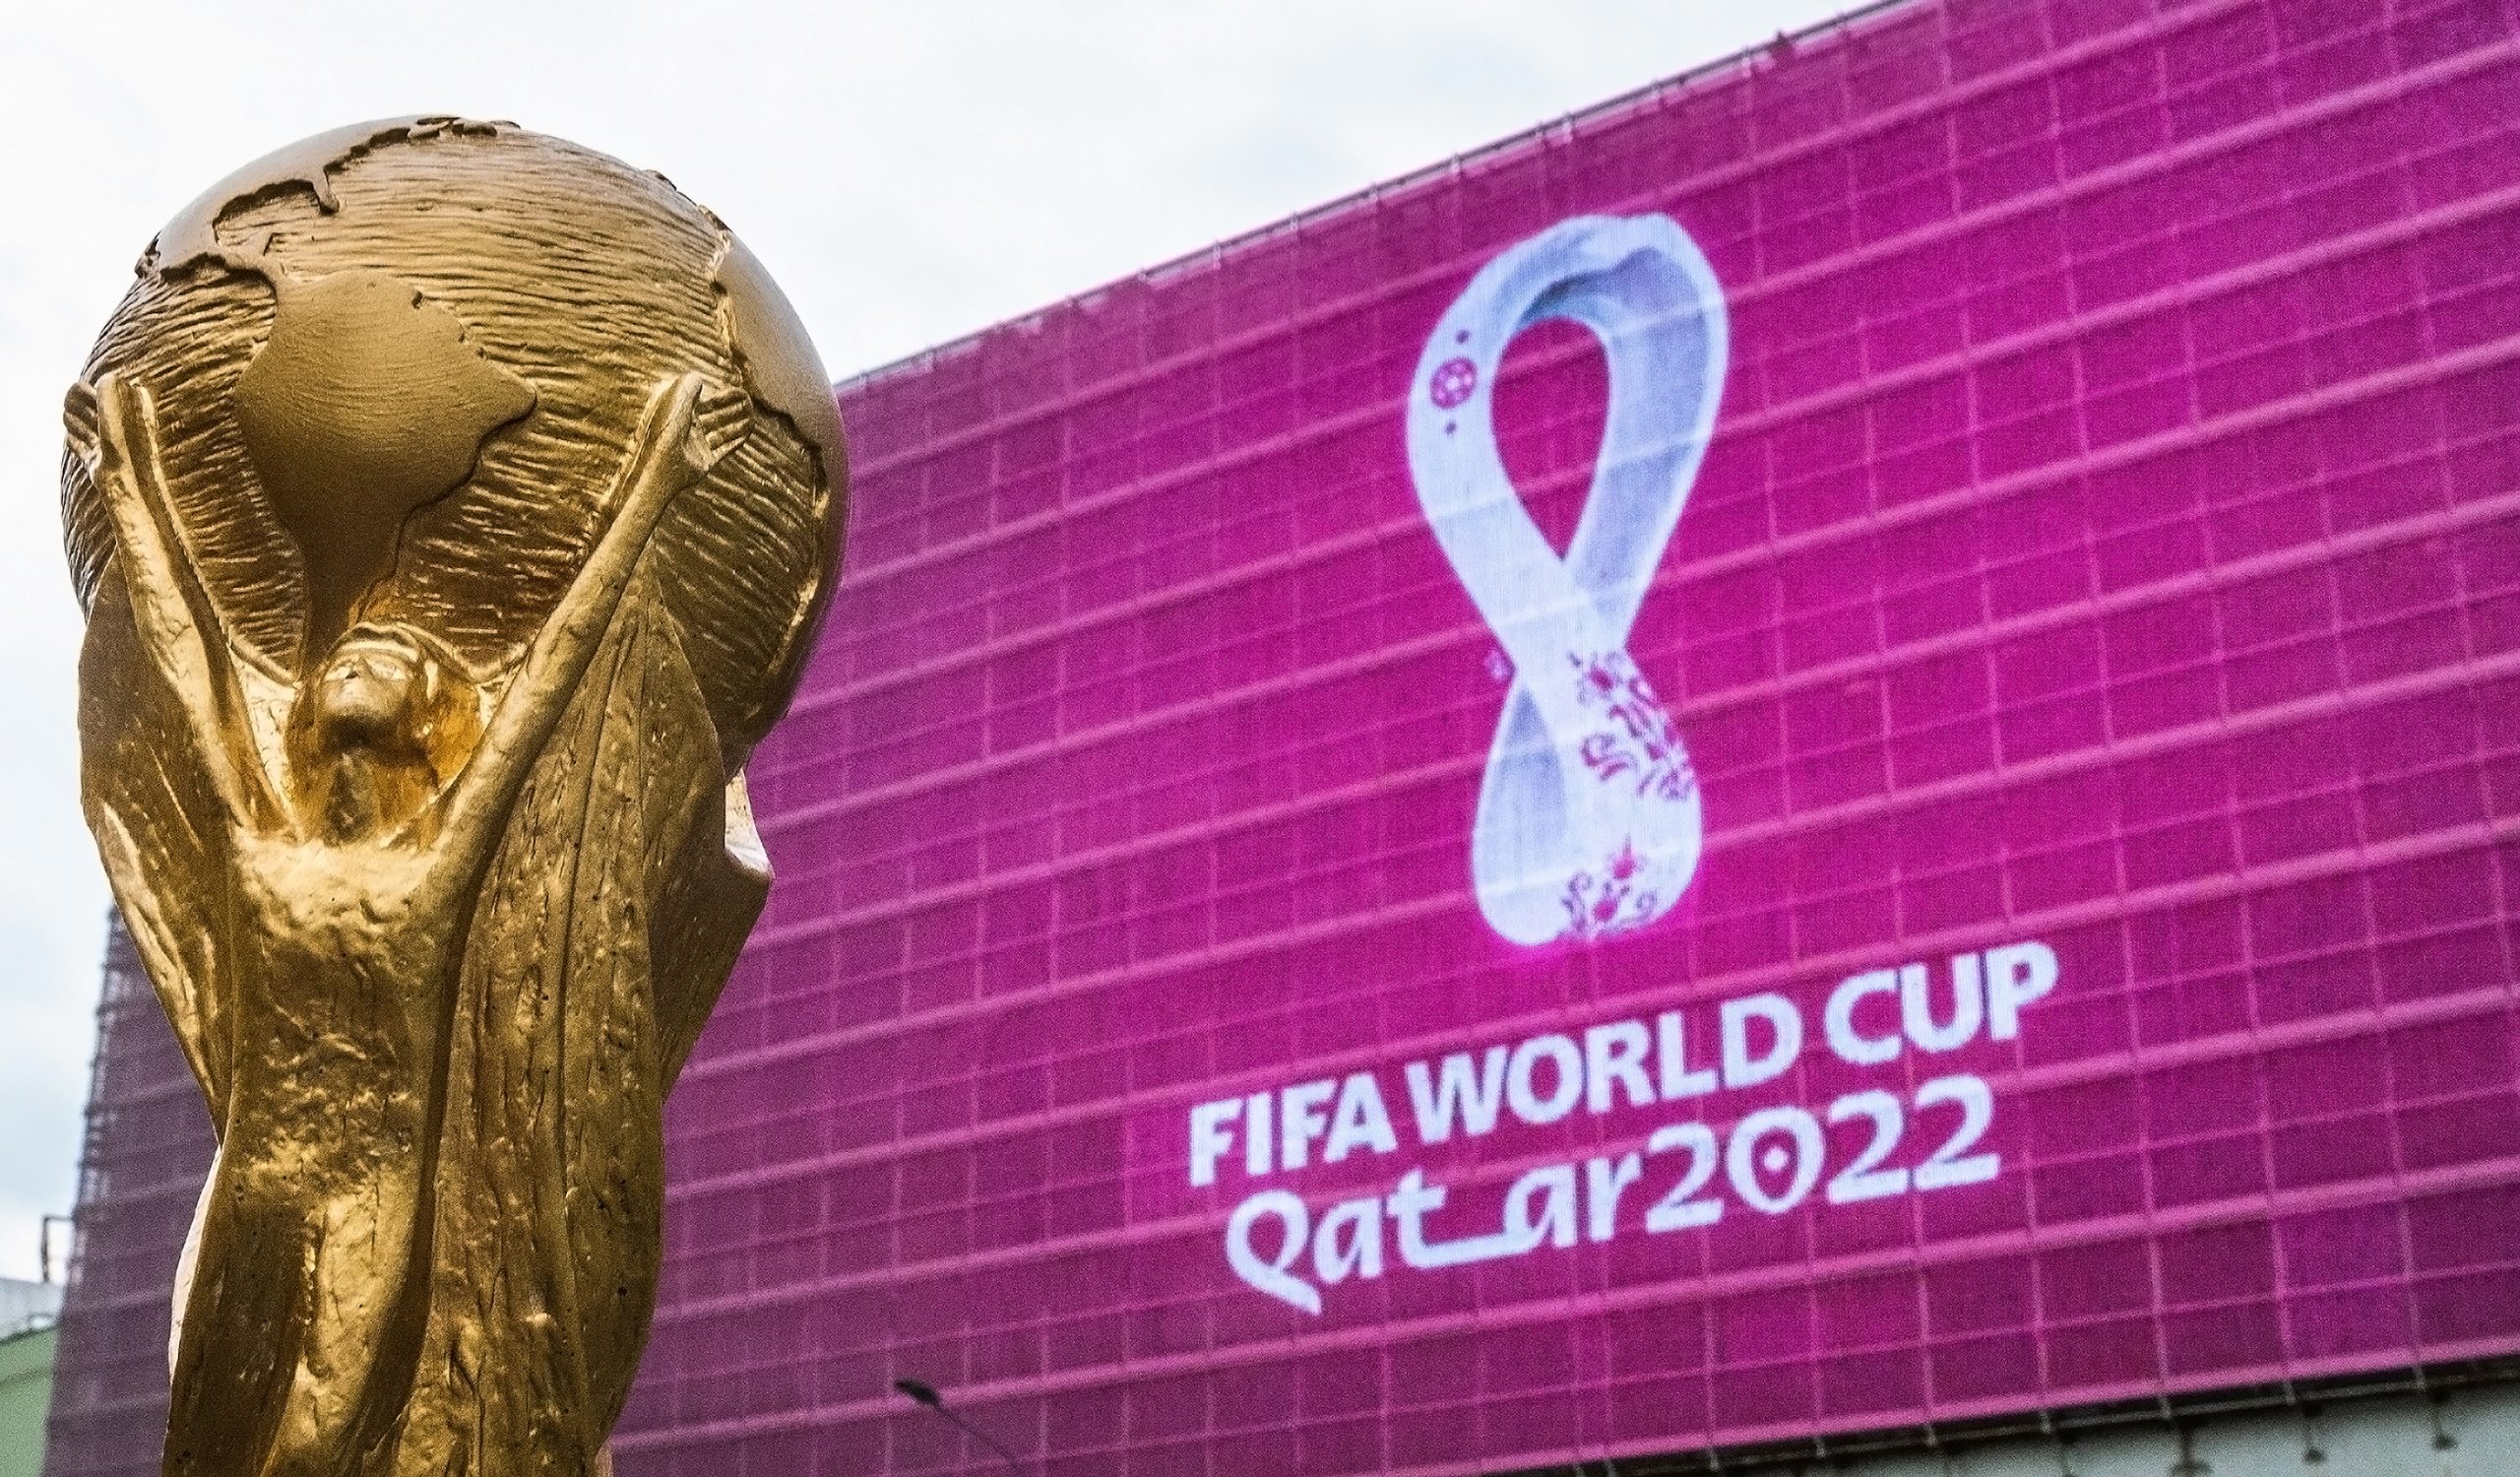 The FIFA World Cup with the Qatar 2022 logo in the background